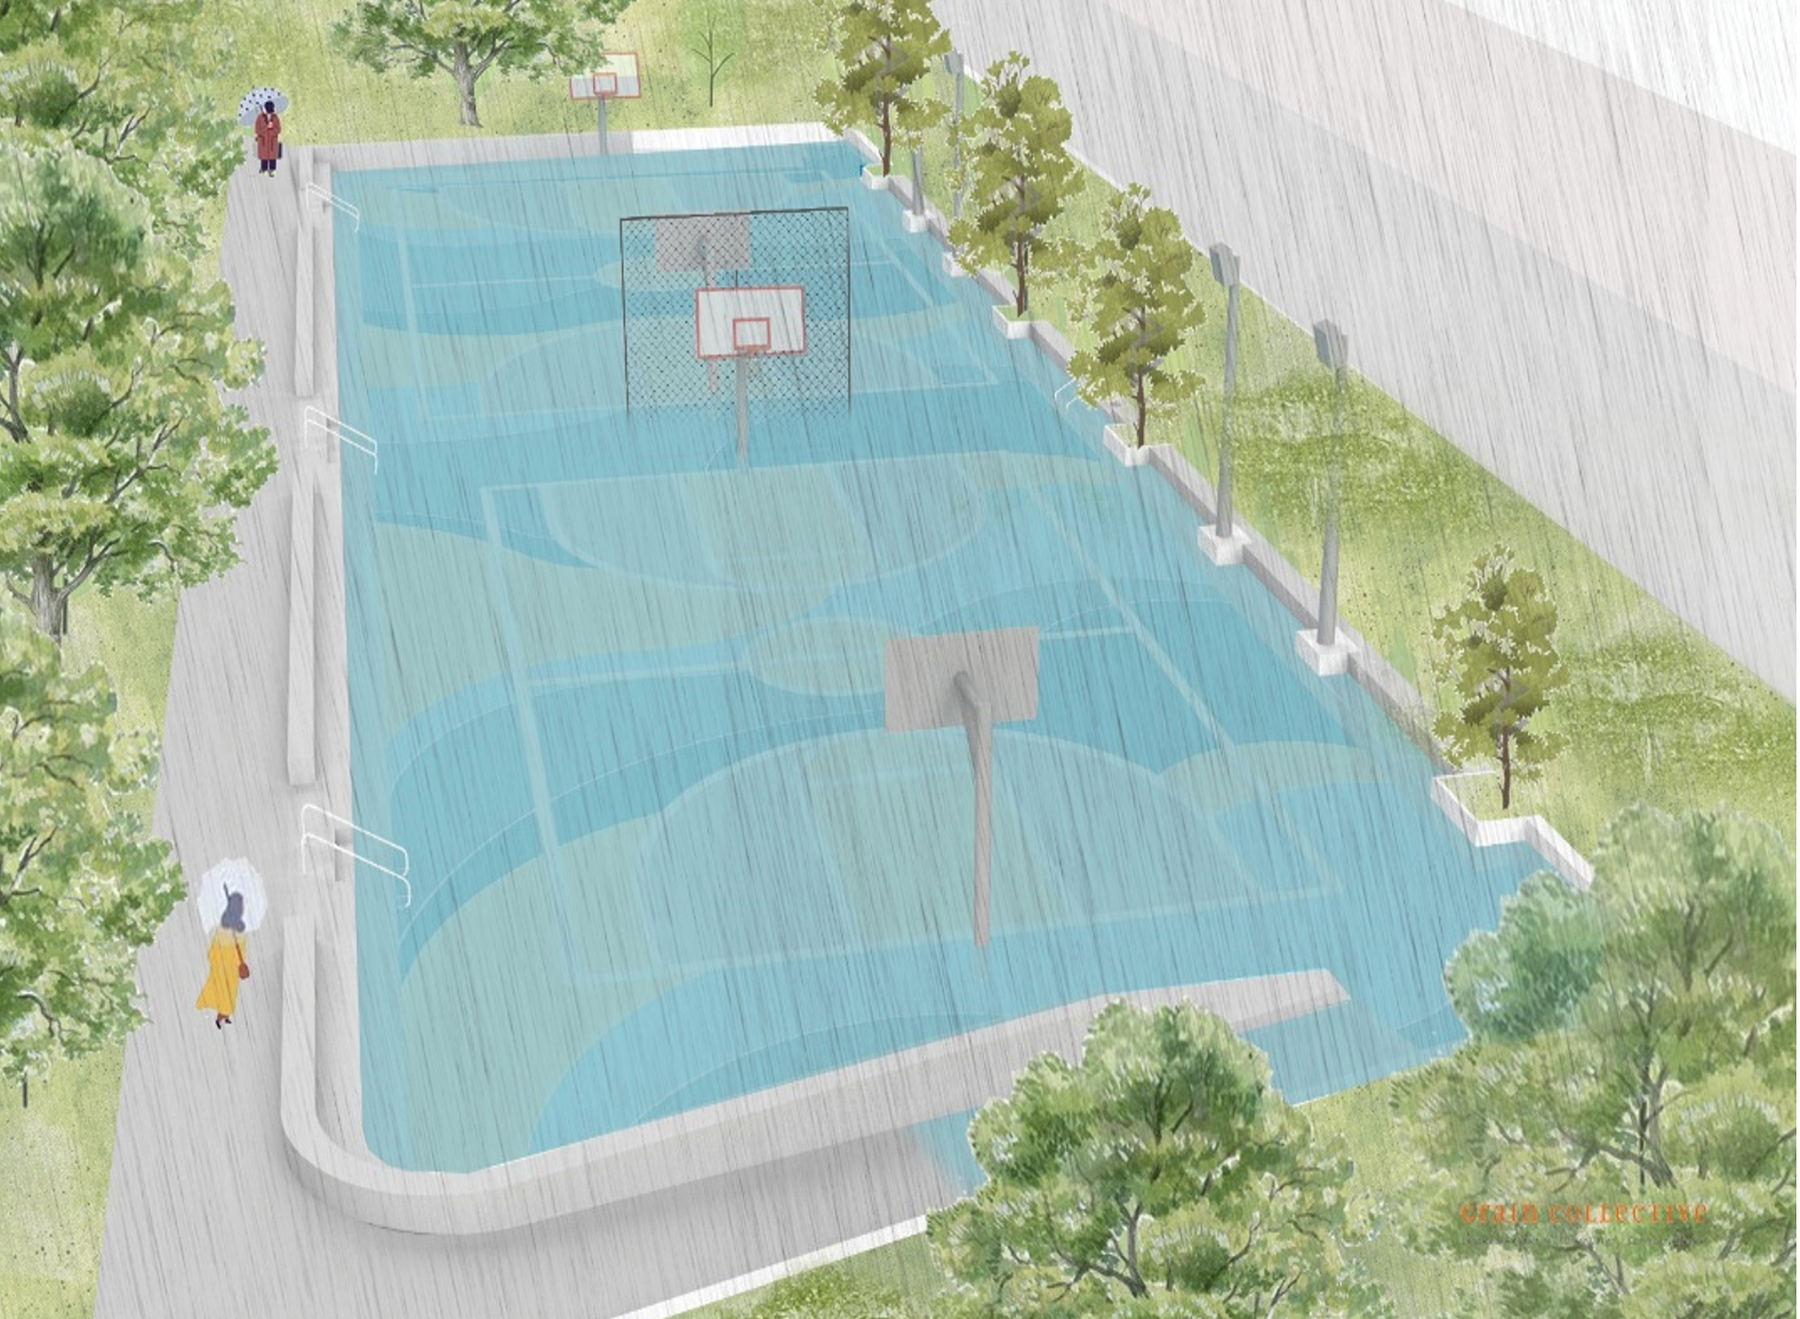 As part of the South Jamaica Houses project in Queens, the surface of an existing basketball court will be lowered so that it can hold stormwater runoff. (Image courtesy of New York City Department of Environmental Protection)